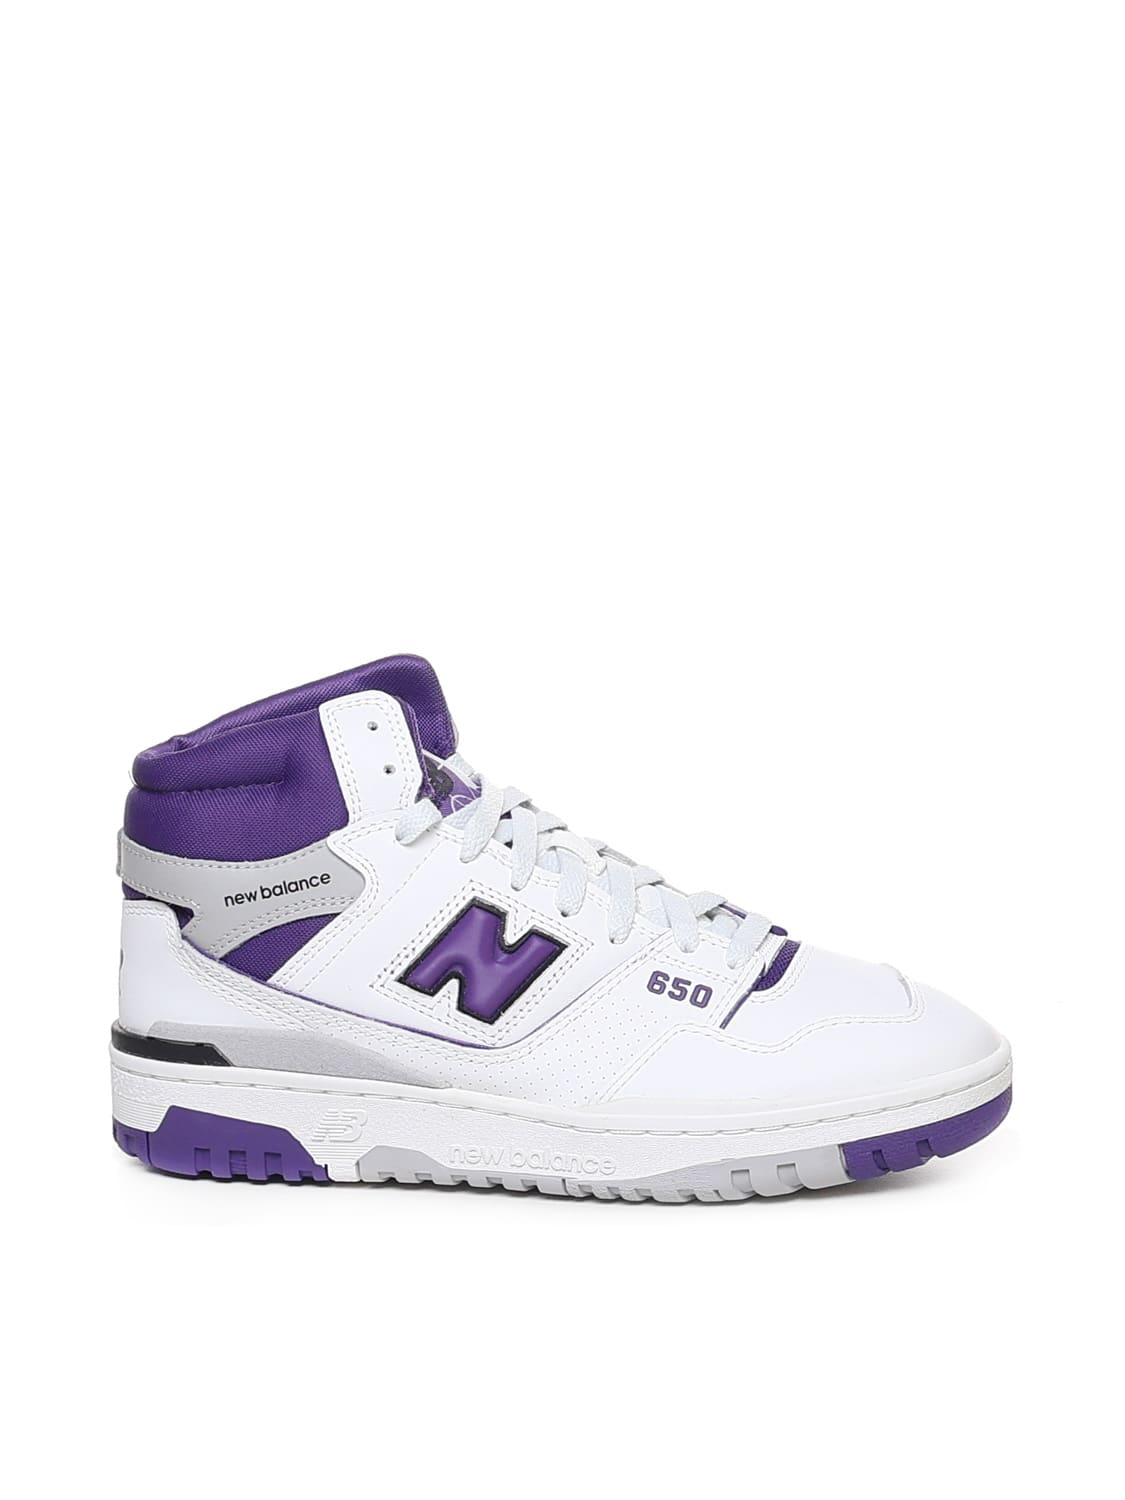 NEW BALANCE SNEAKERS 550 LIFESTYLE HIGH